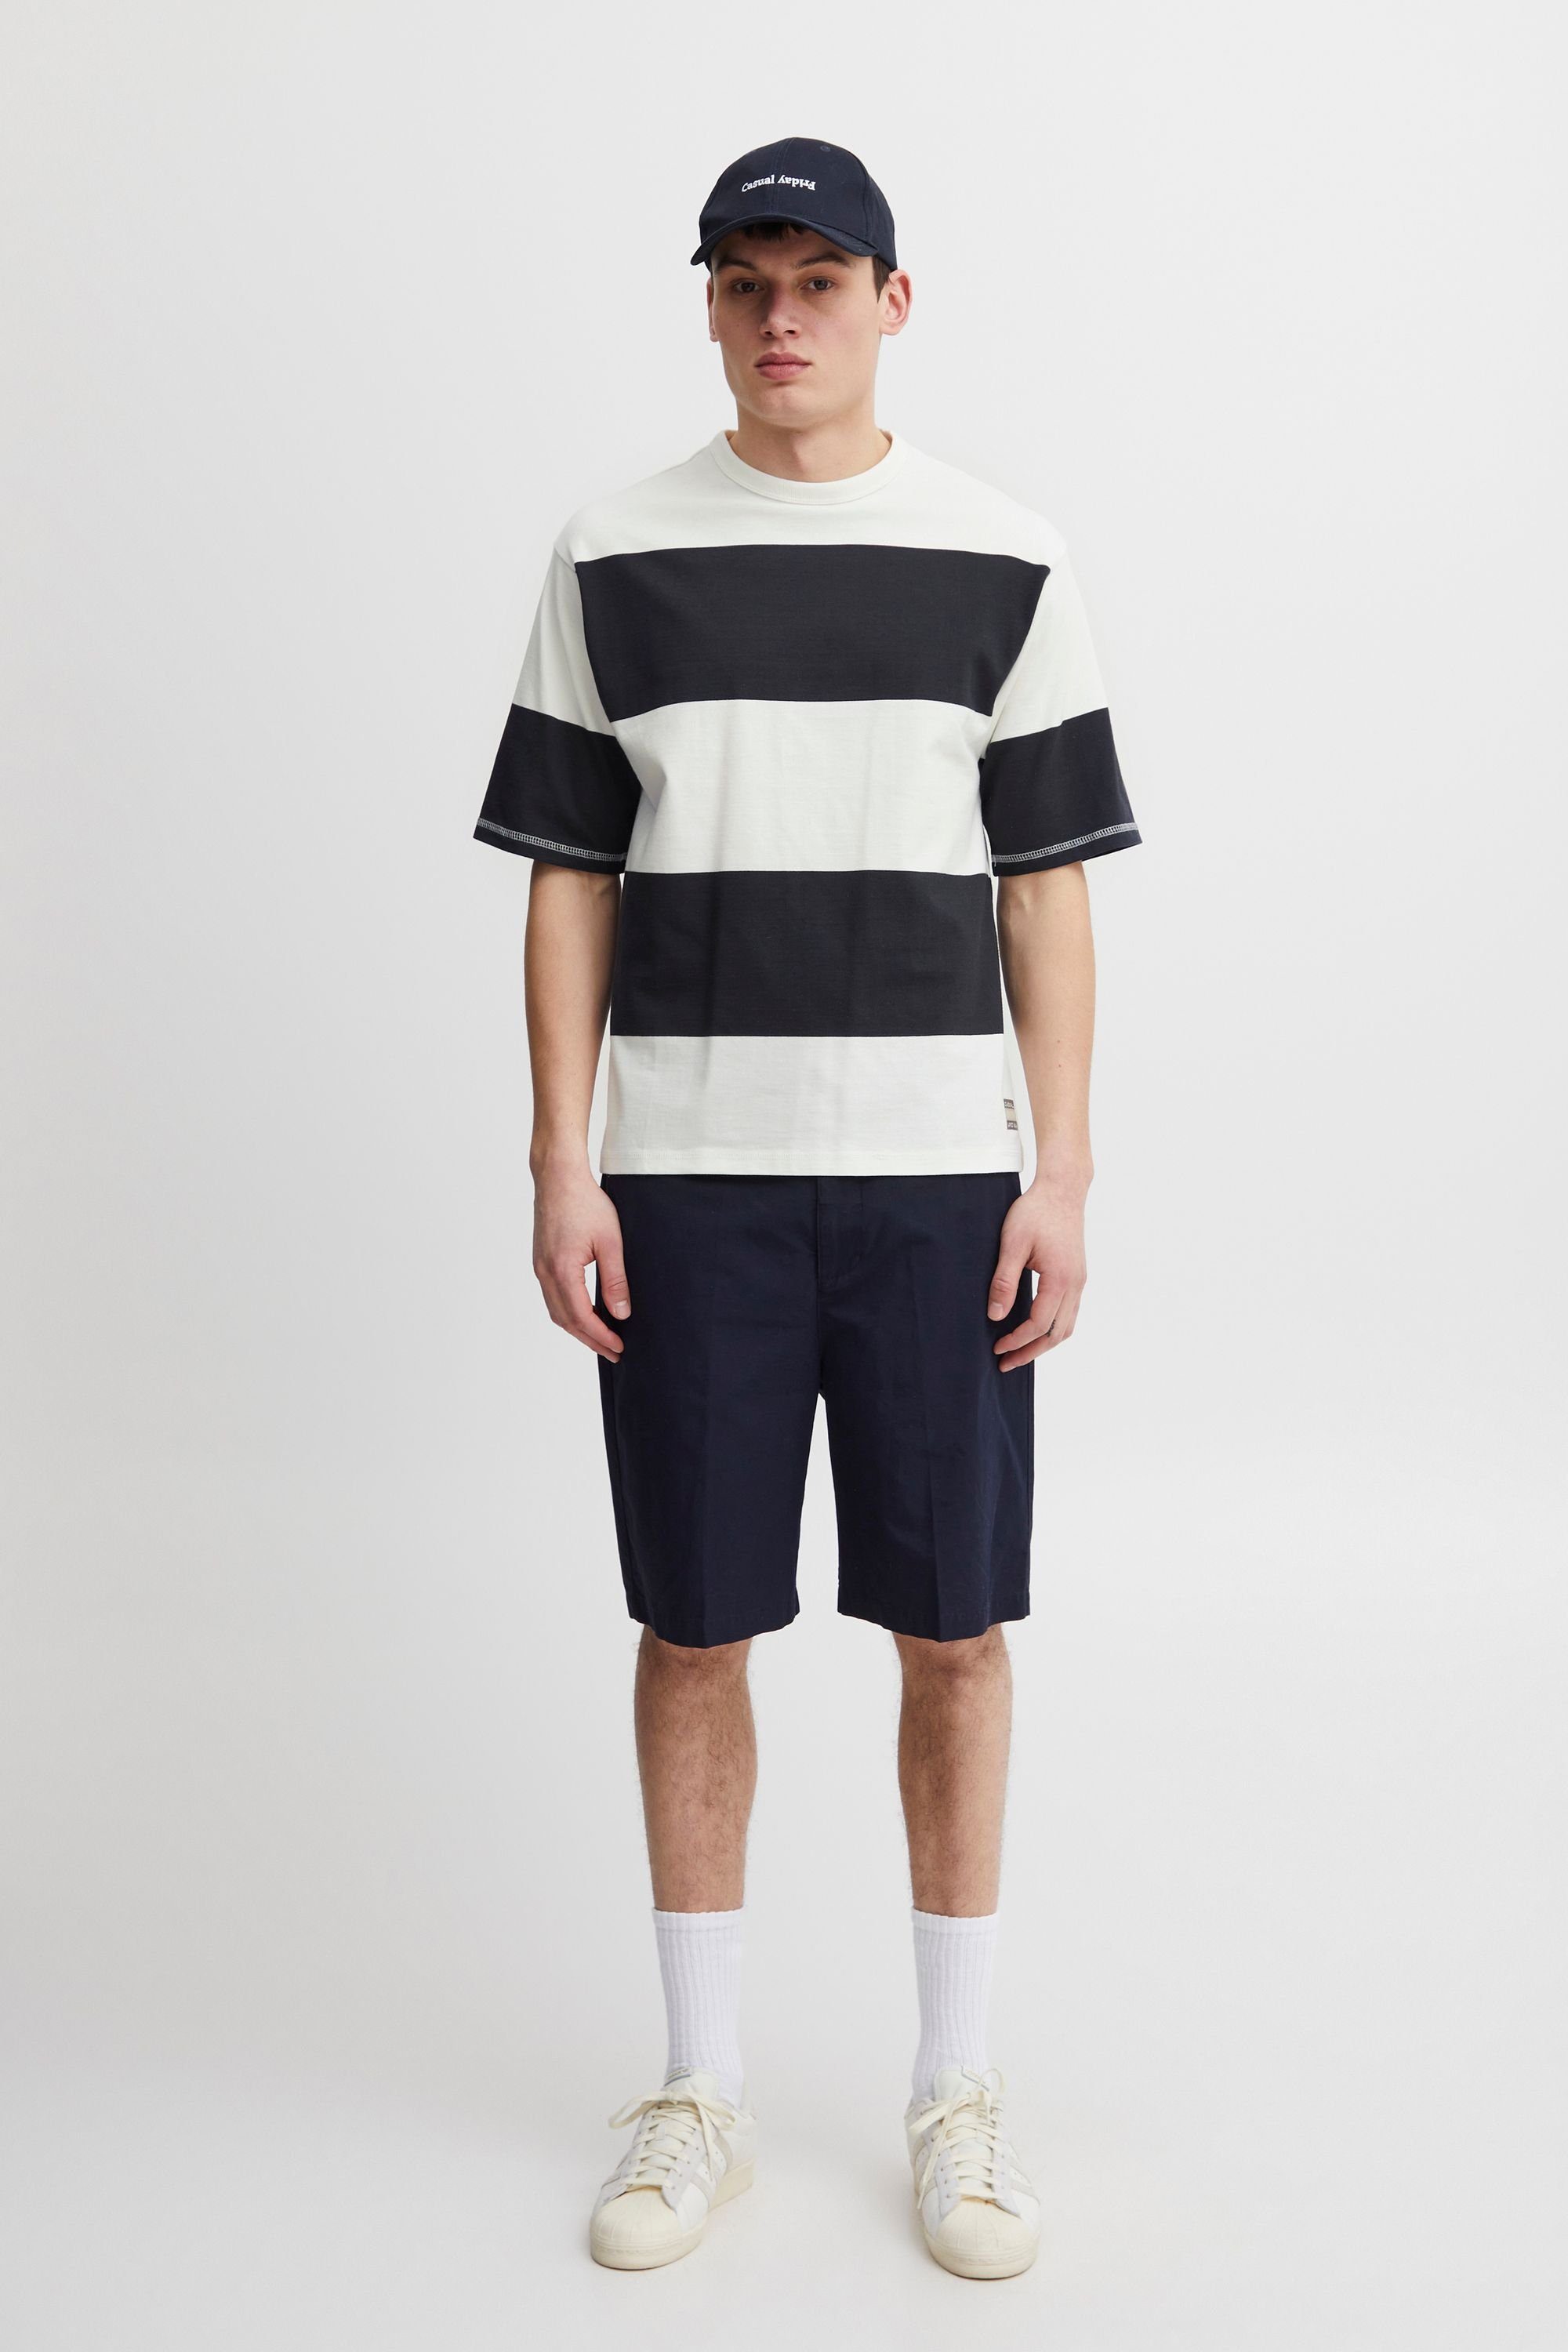 Casual Friday CFTue 20504714 striped T-Shirt wide - tee